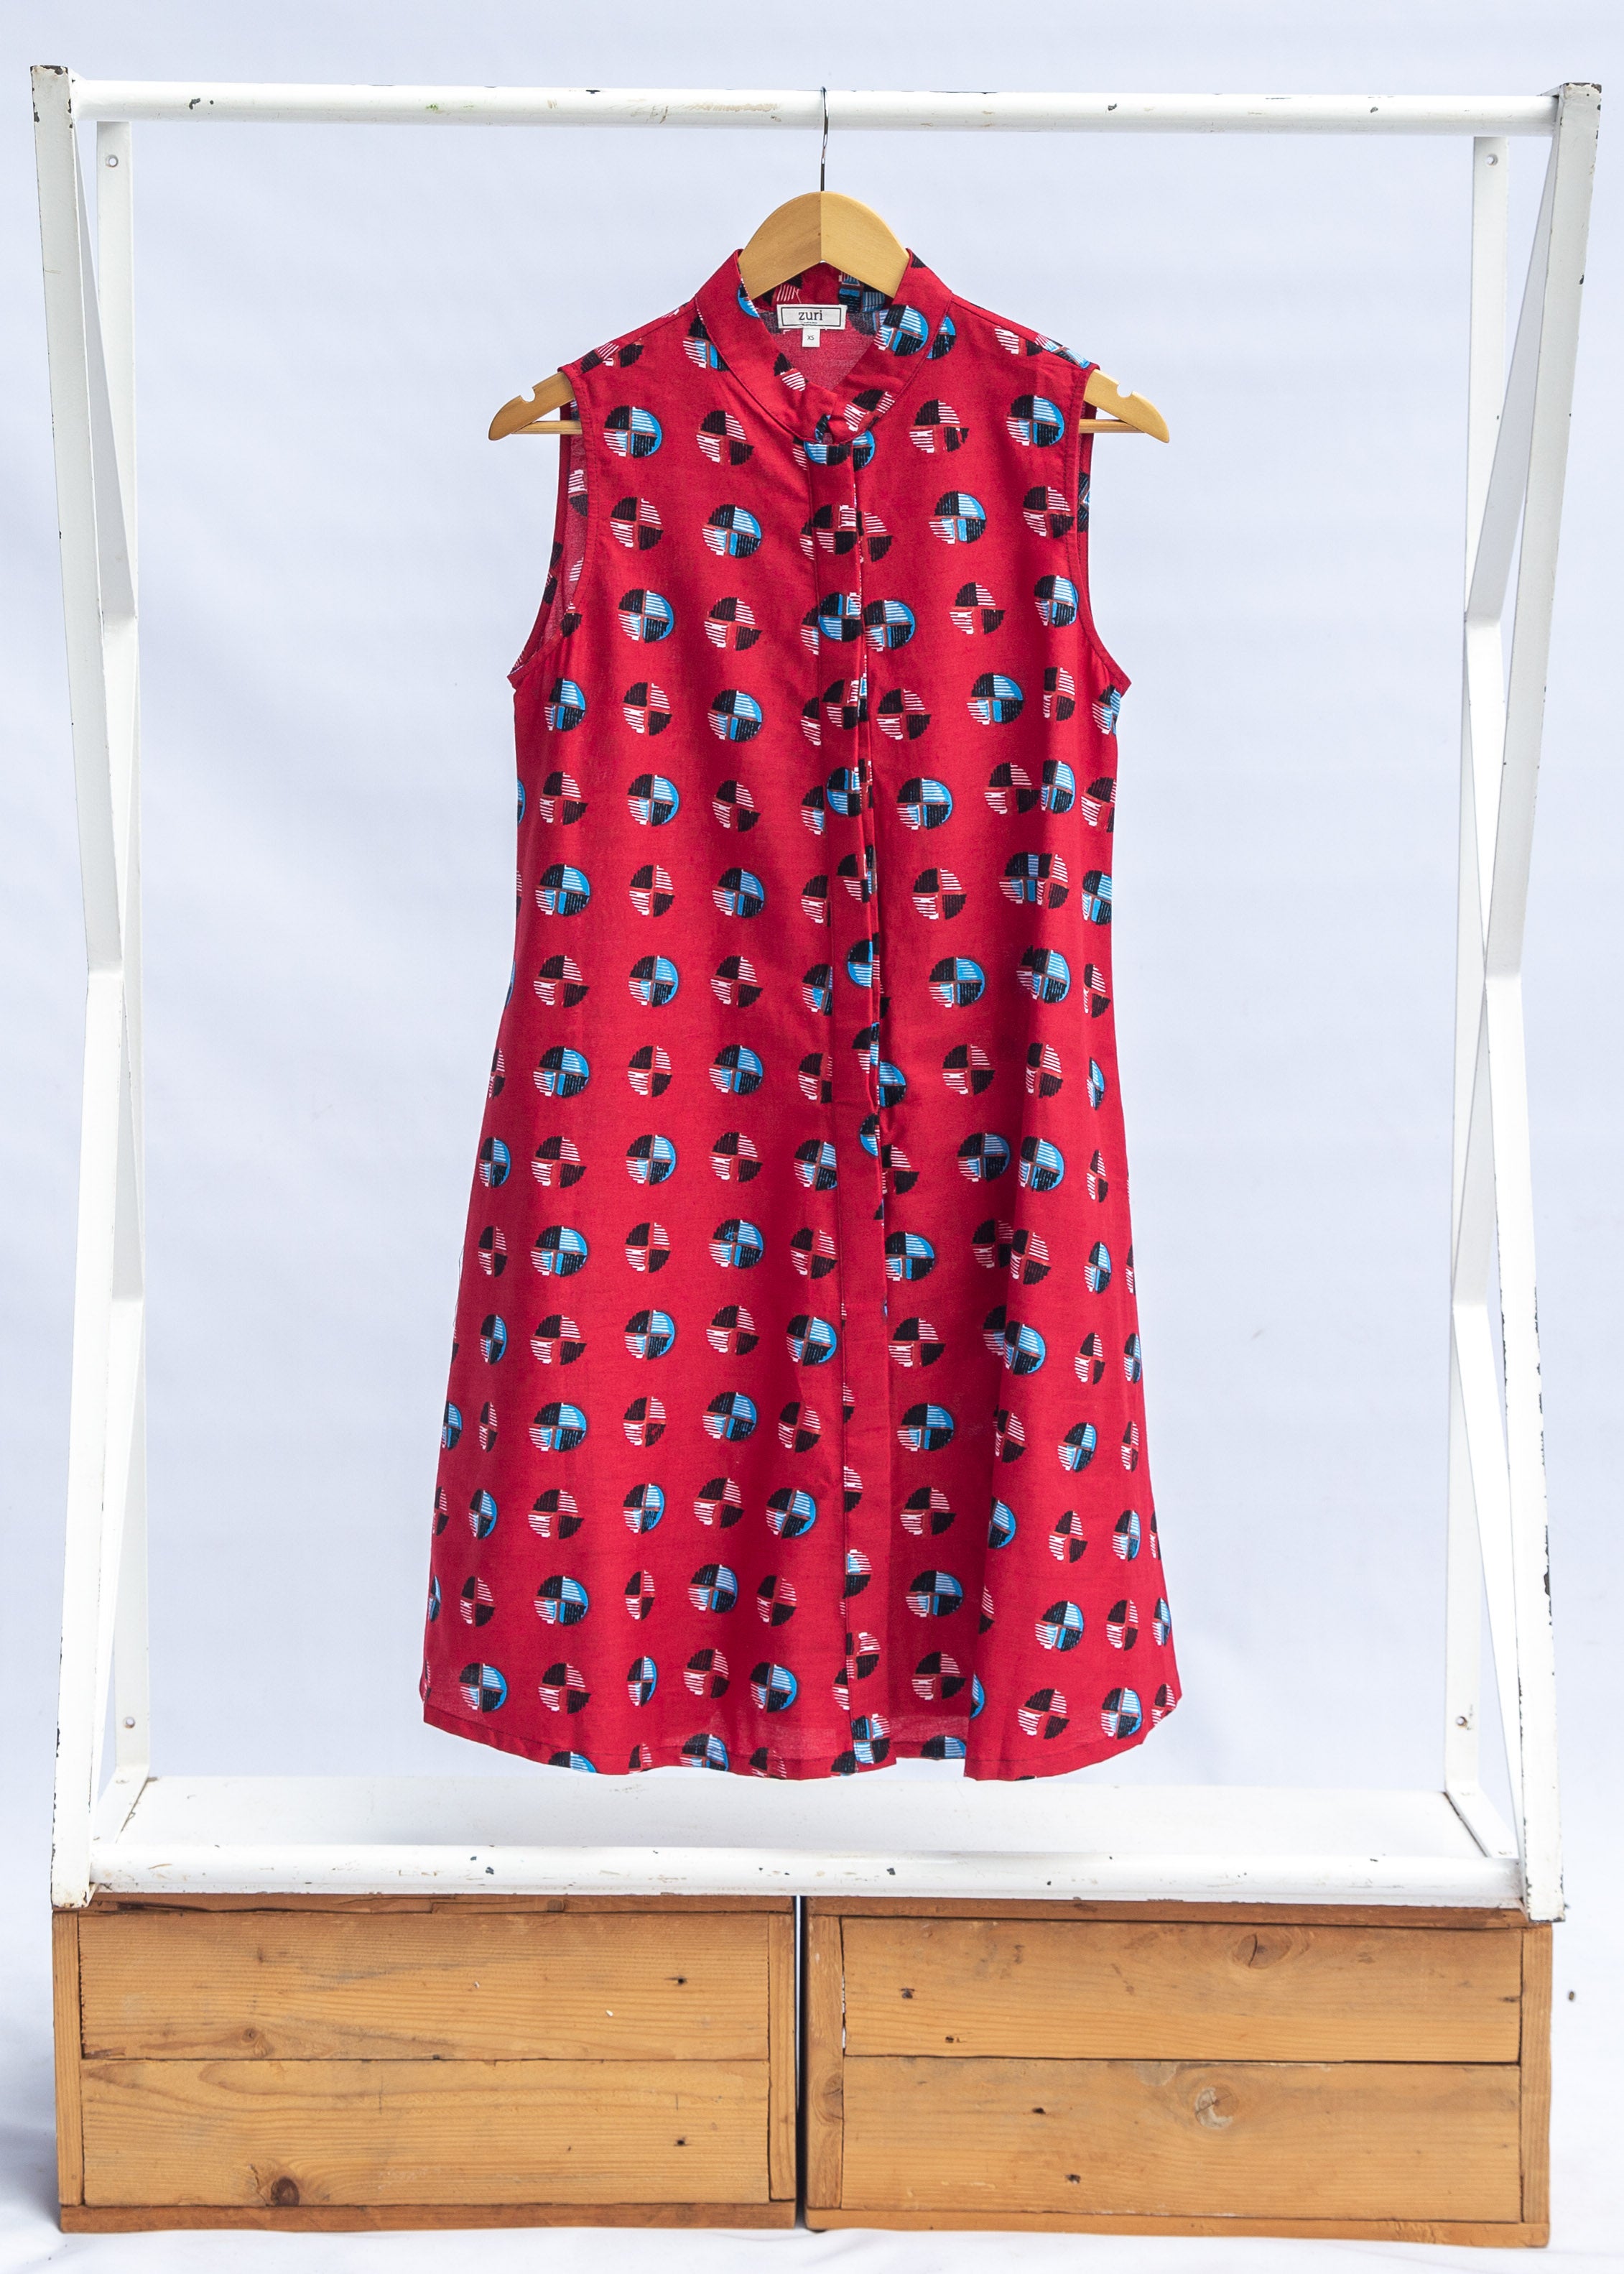 display of a sleeveless dress with a red, blue, white and black design